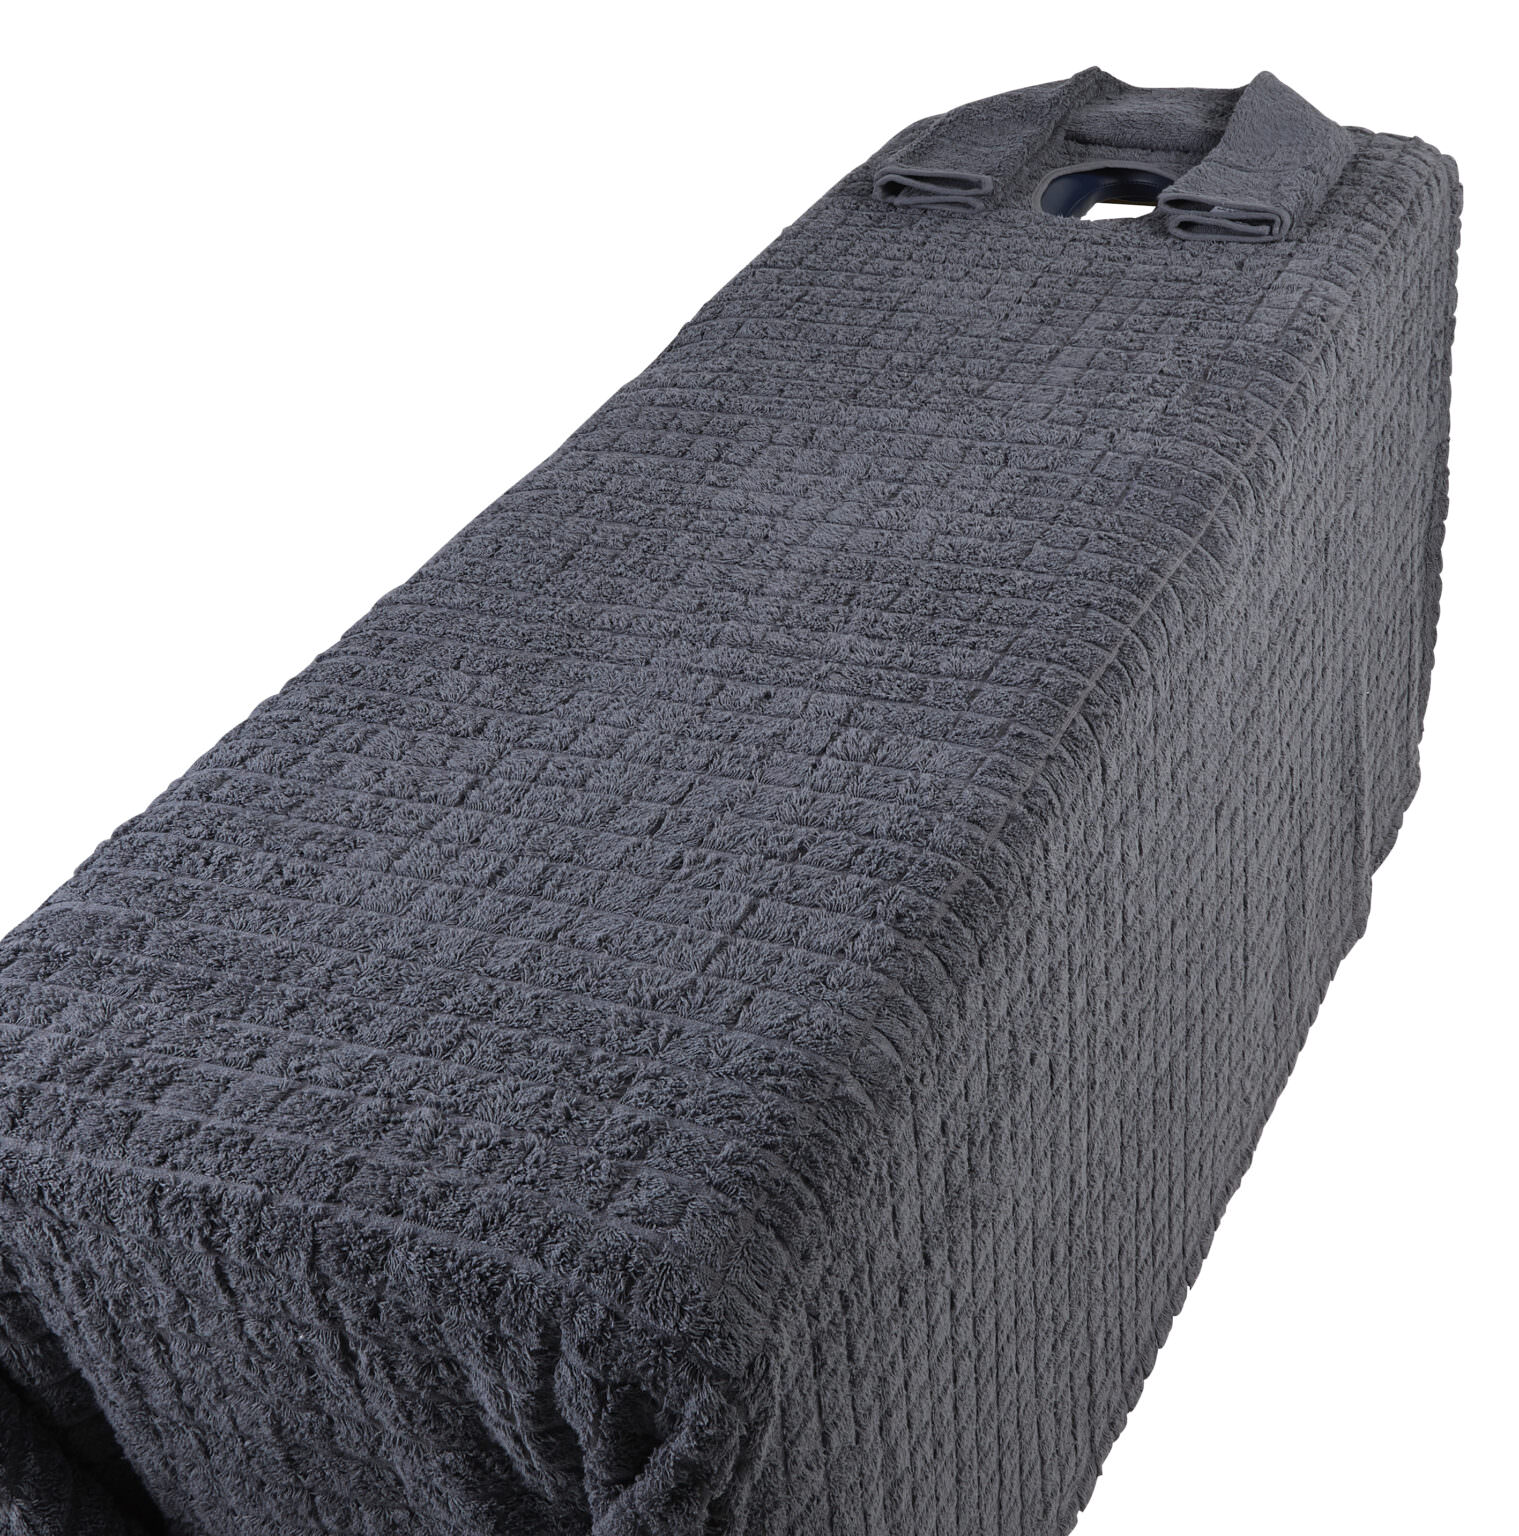 Ecoknit Spa Couch Cover With Head Hole 200 X 240cm Charcoal Hartdean Ltd